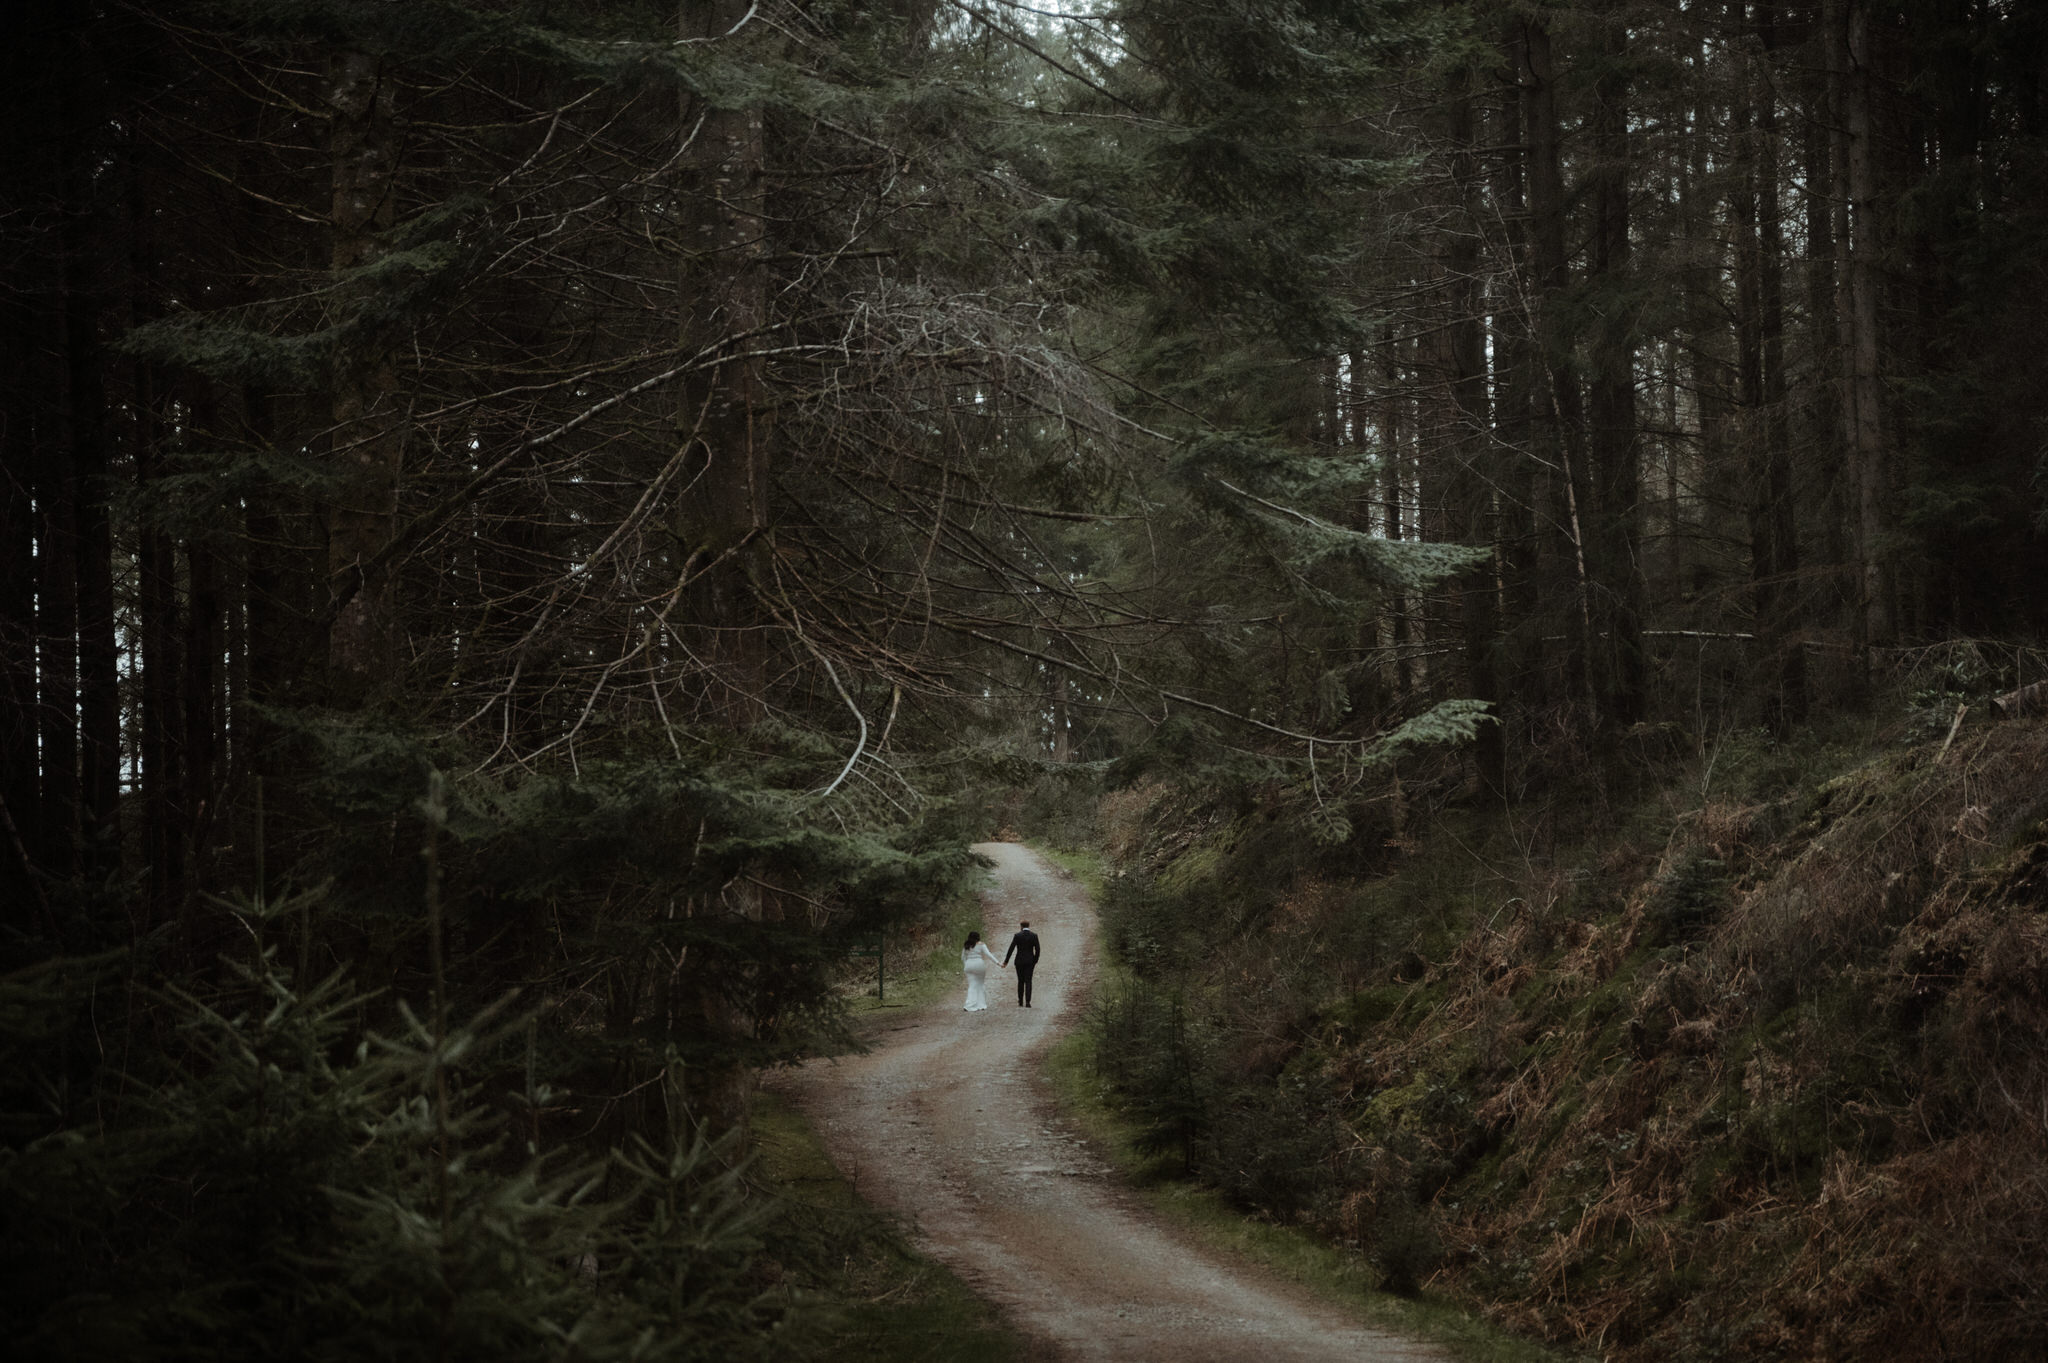 elope to scotland couple running on a road in a woodland